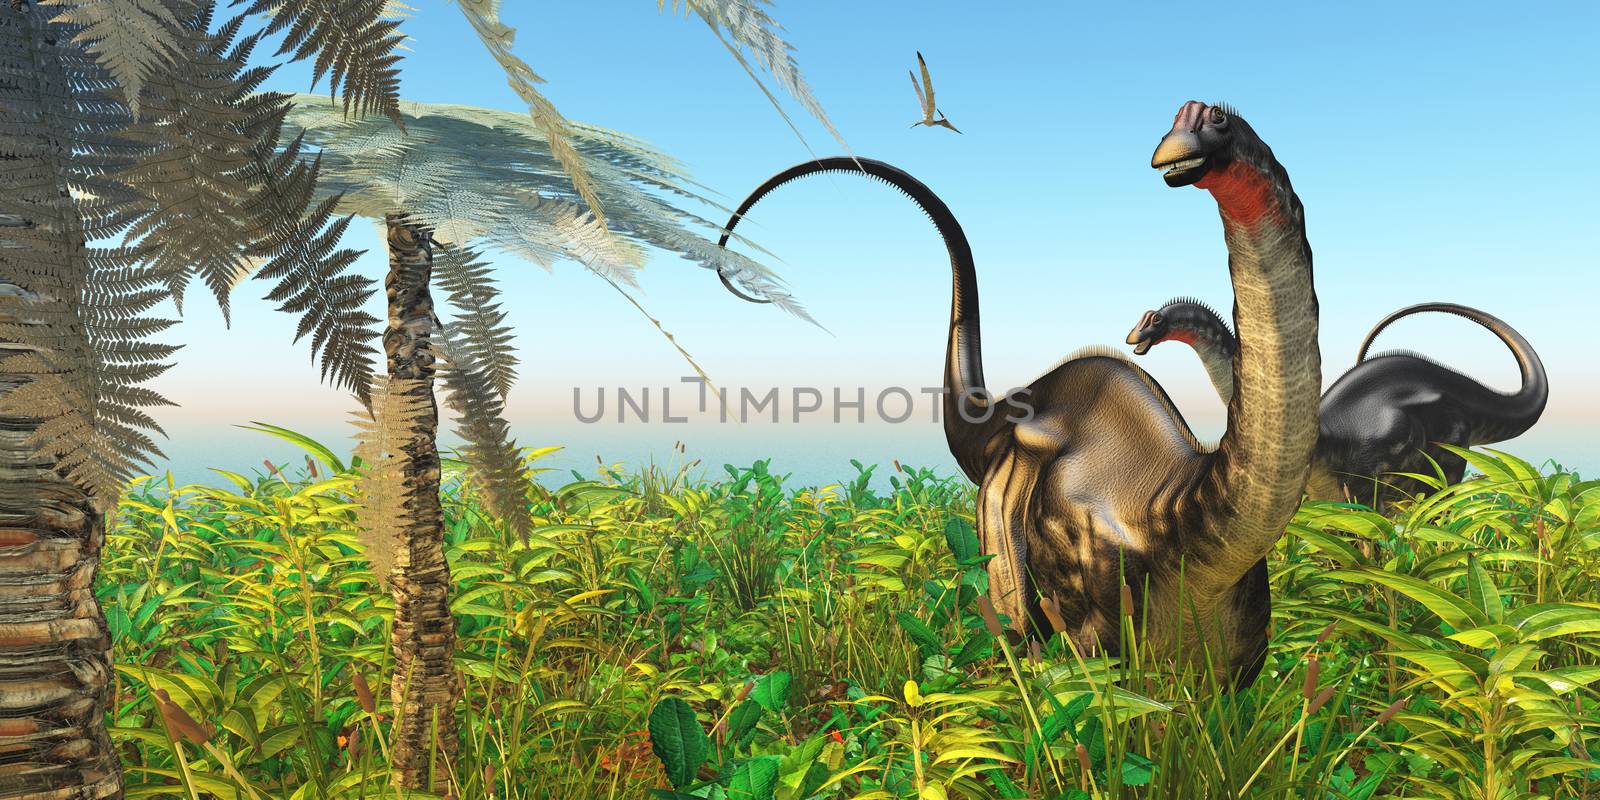 A Pteranodon flies past two Apatosaurus dinosaurs in a lush Cretaceous jungle.